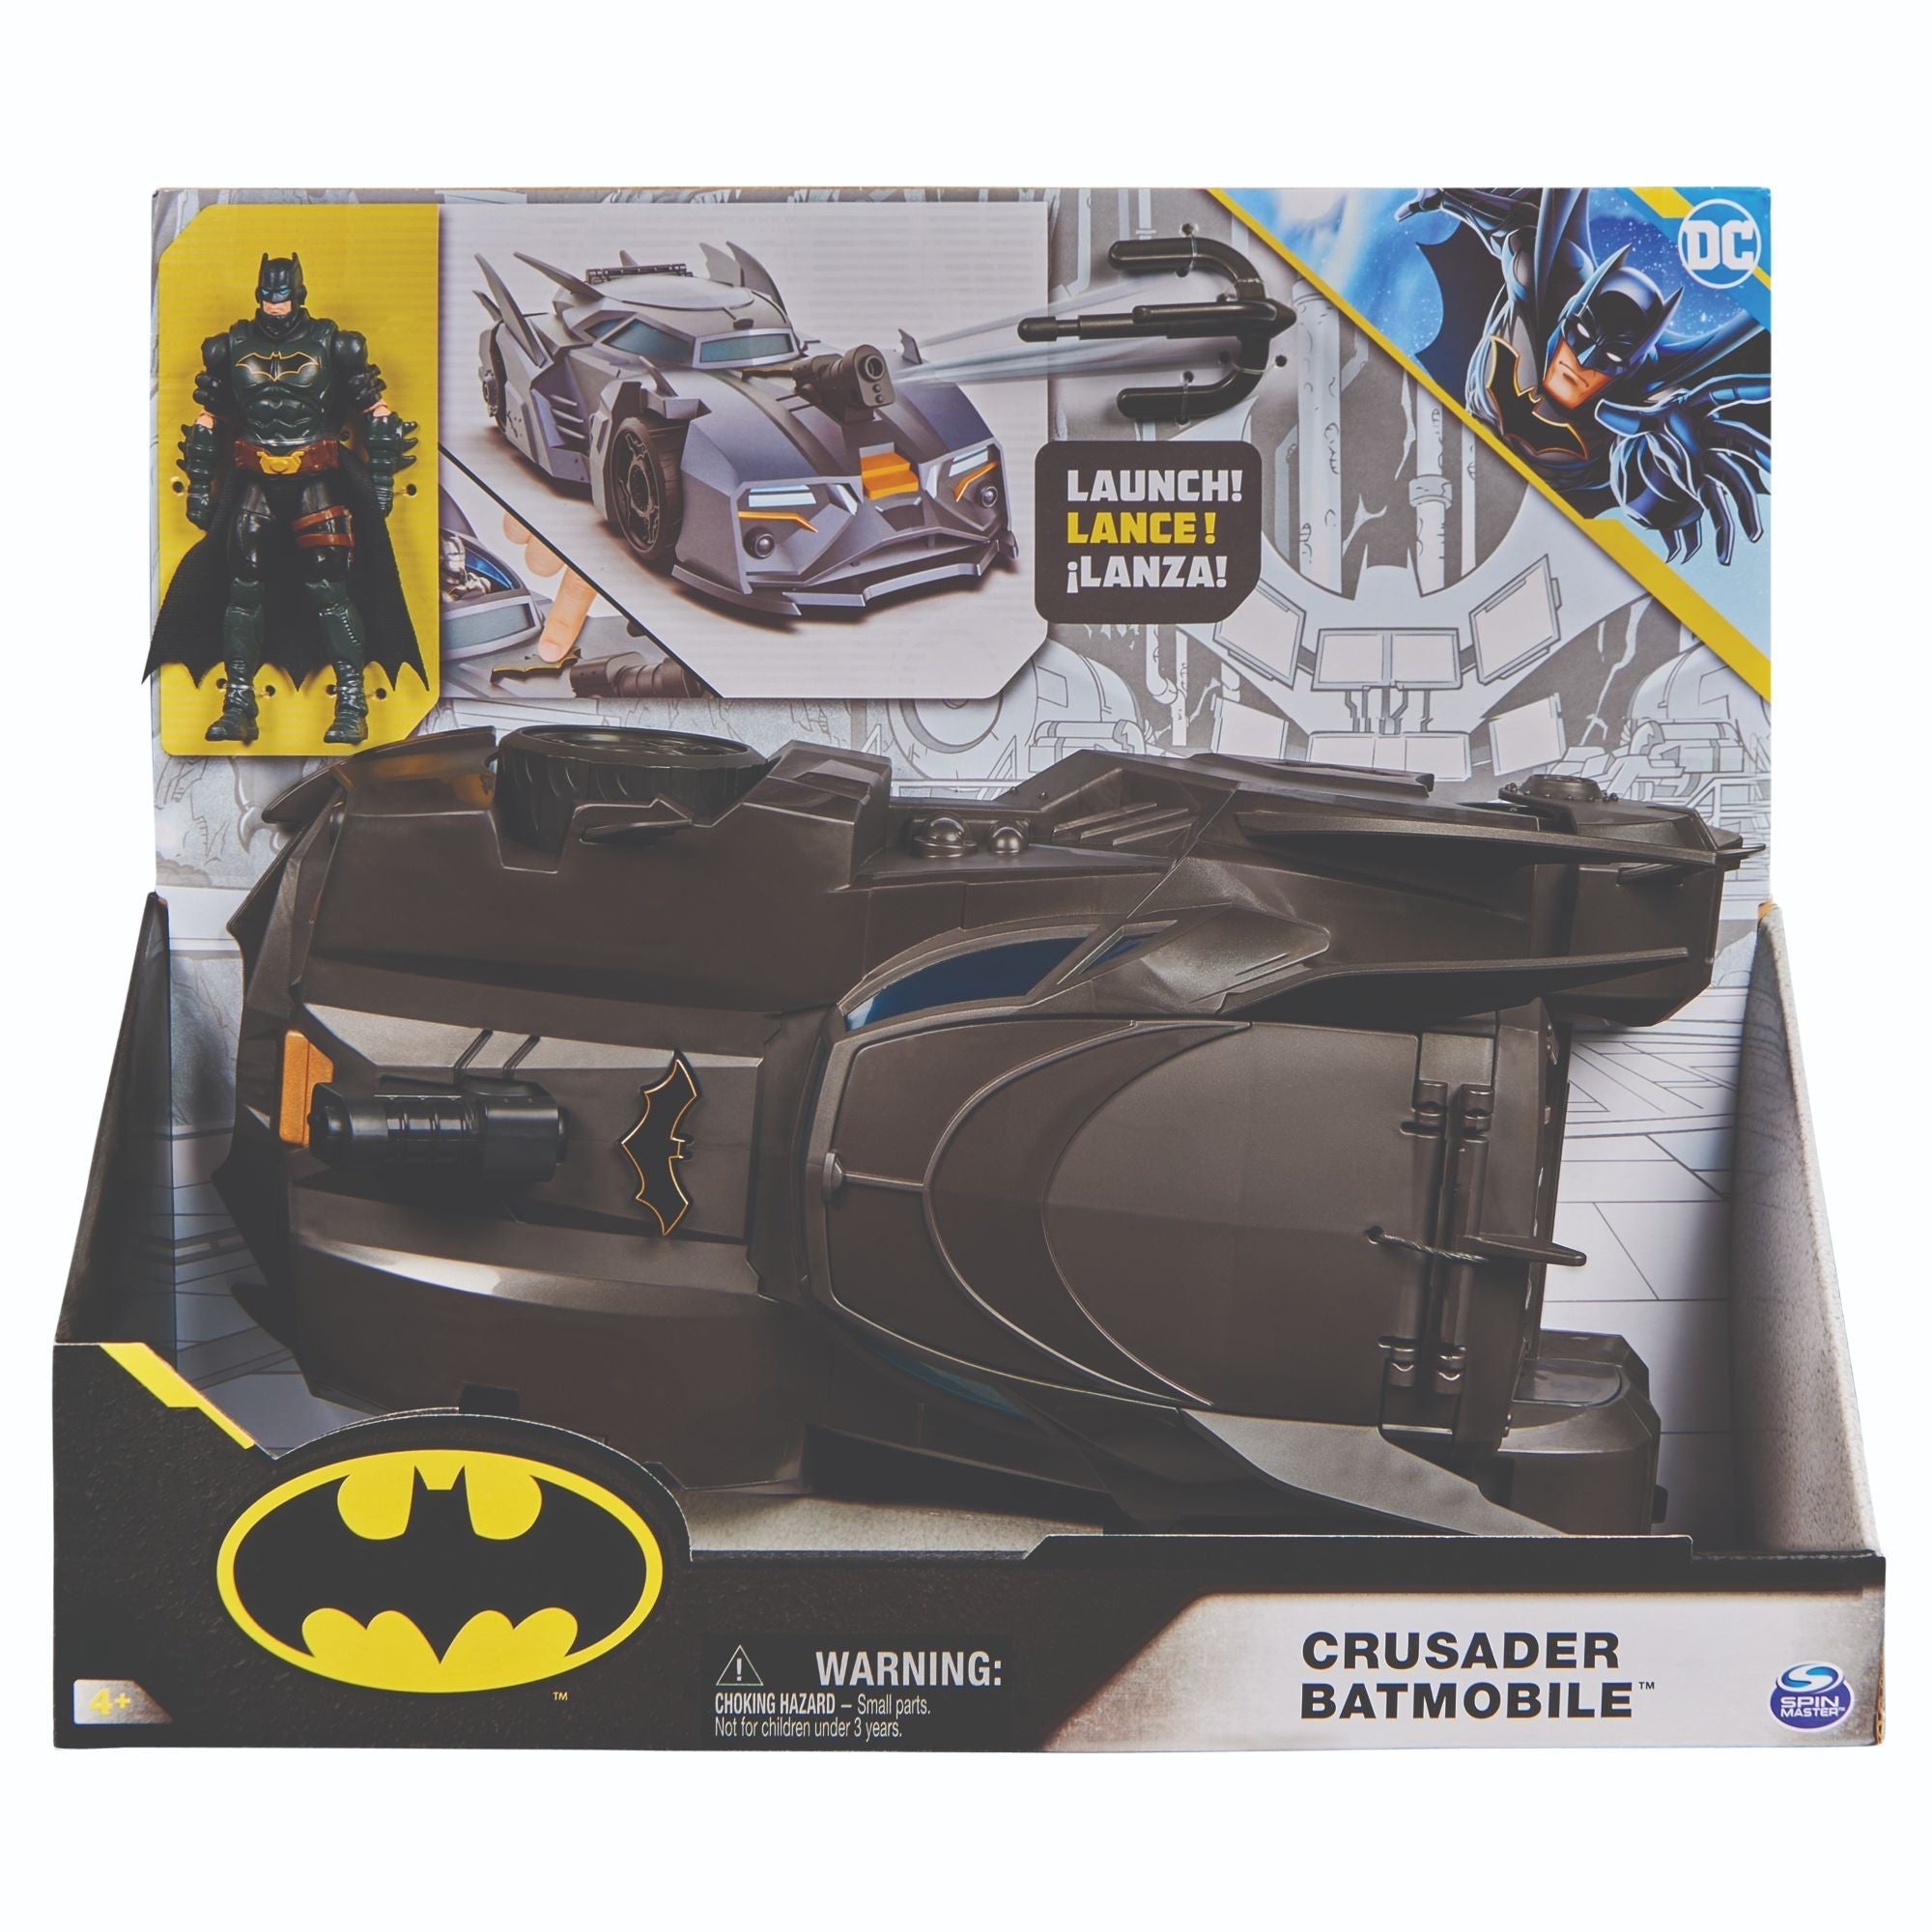 Spin Master-Crusader Batmobile Playset with Exclusive 4-inch Batman Figure-6067473-Legacy Toys